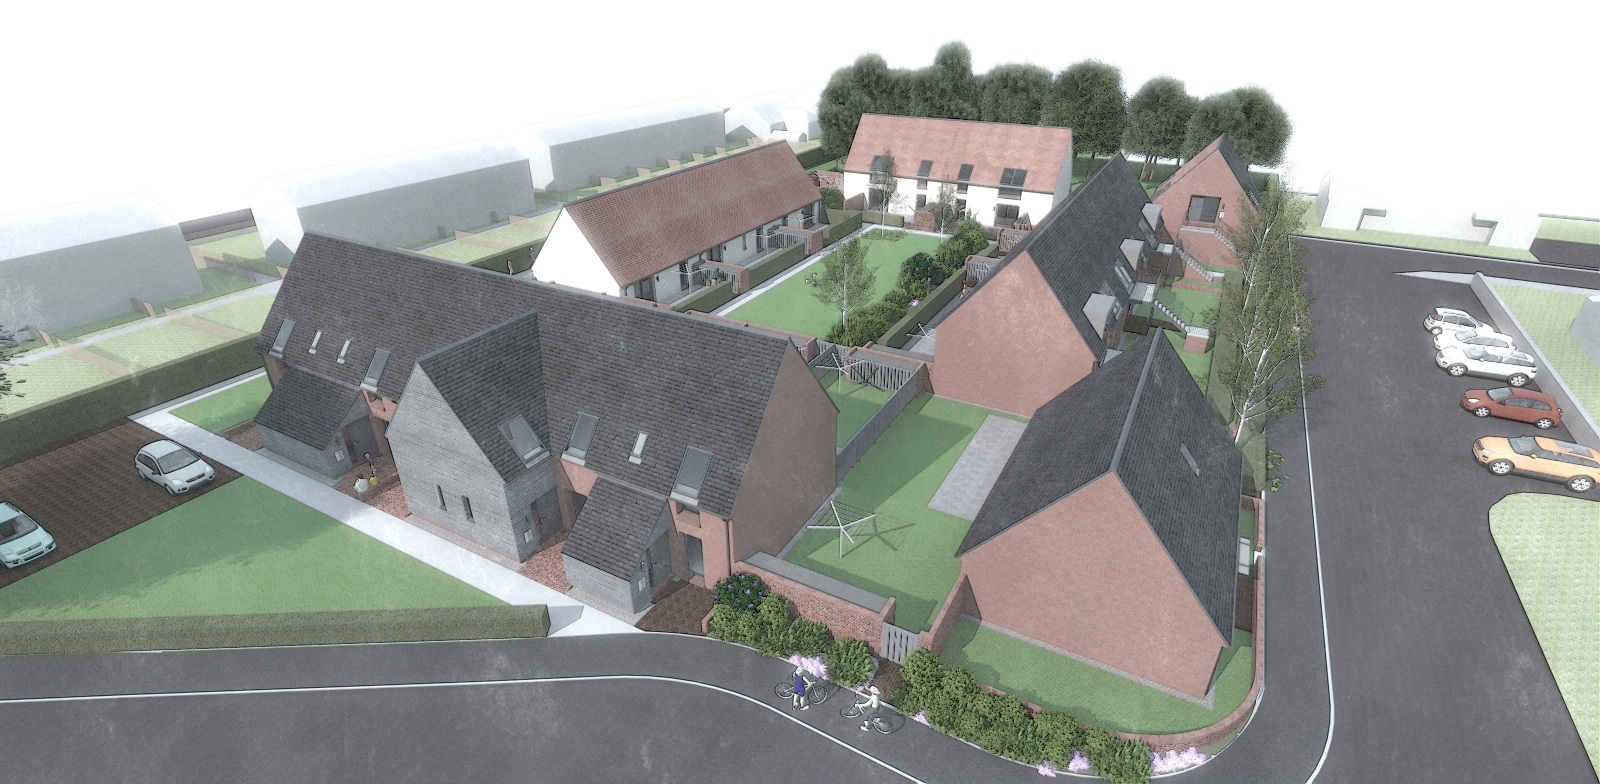 Edzell affordable homes plan on hold as community protests against sheltered housing demolition